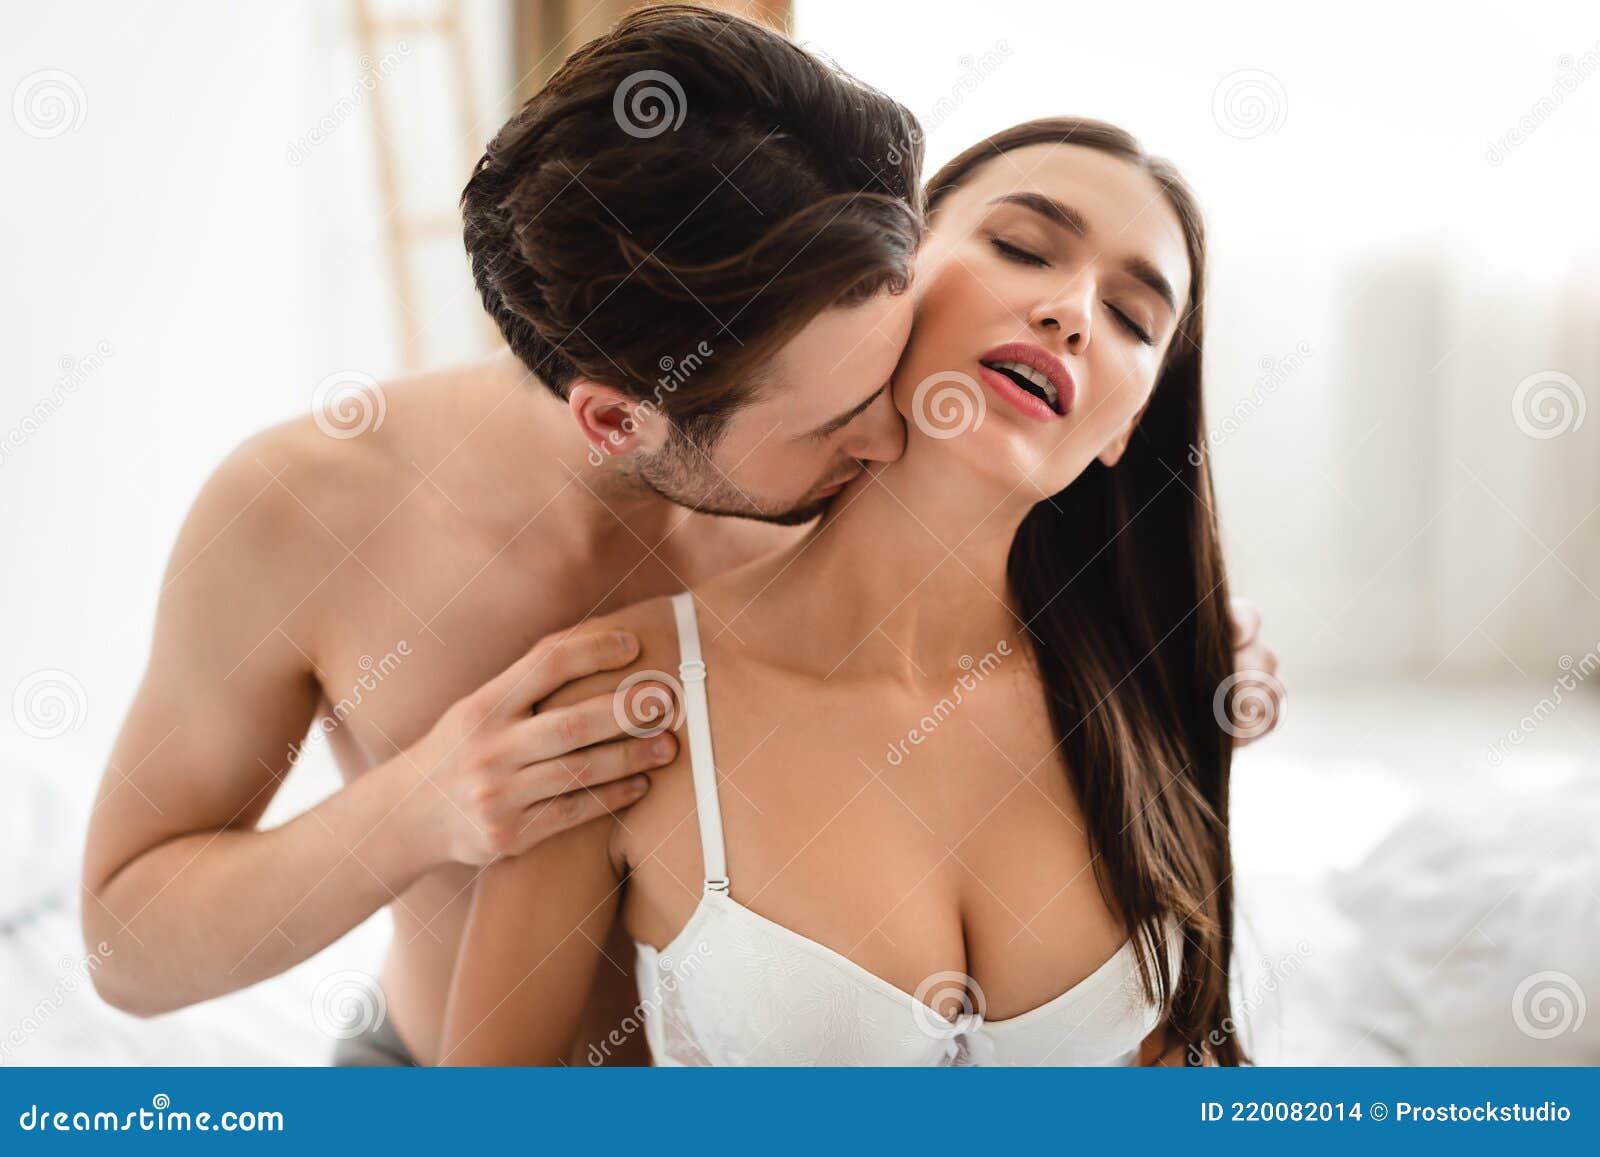 Passionate Man Kissing Womanand X27;s Neck Having Sex in Bedroom Indoors Stock Photo photo